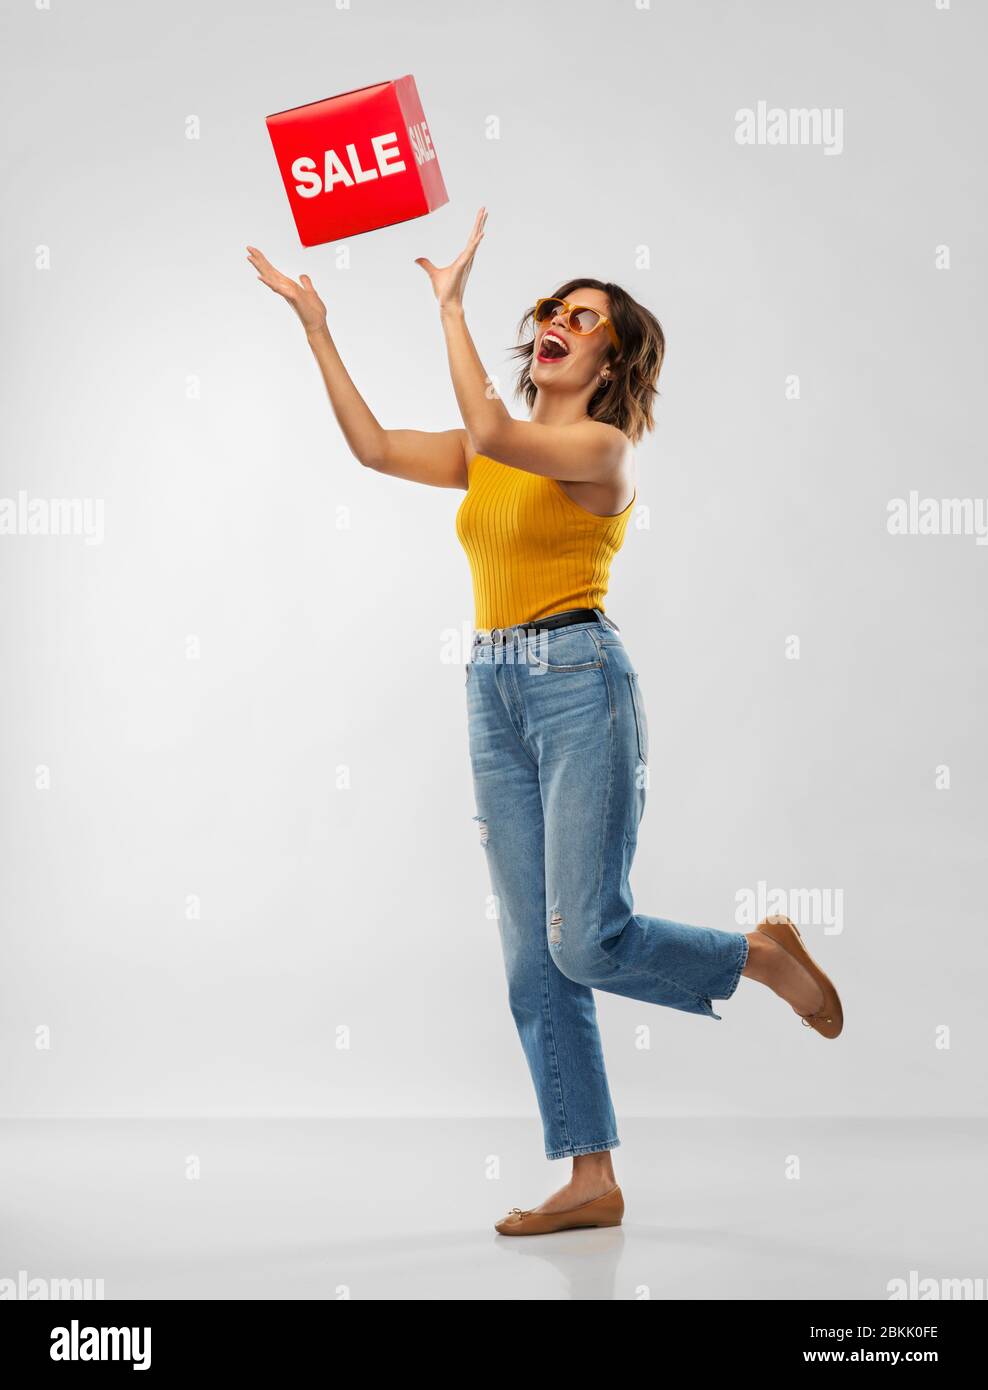 happy smiling young woman posing with sale sign Stock Photo